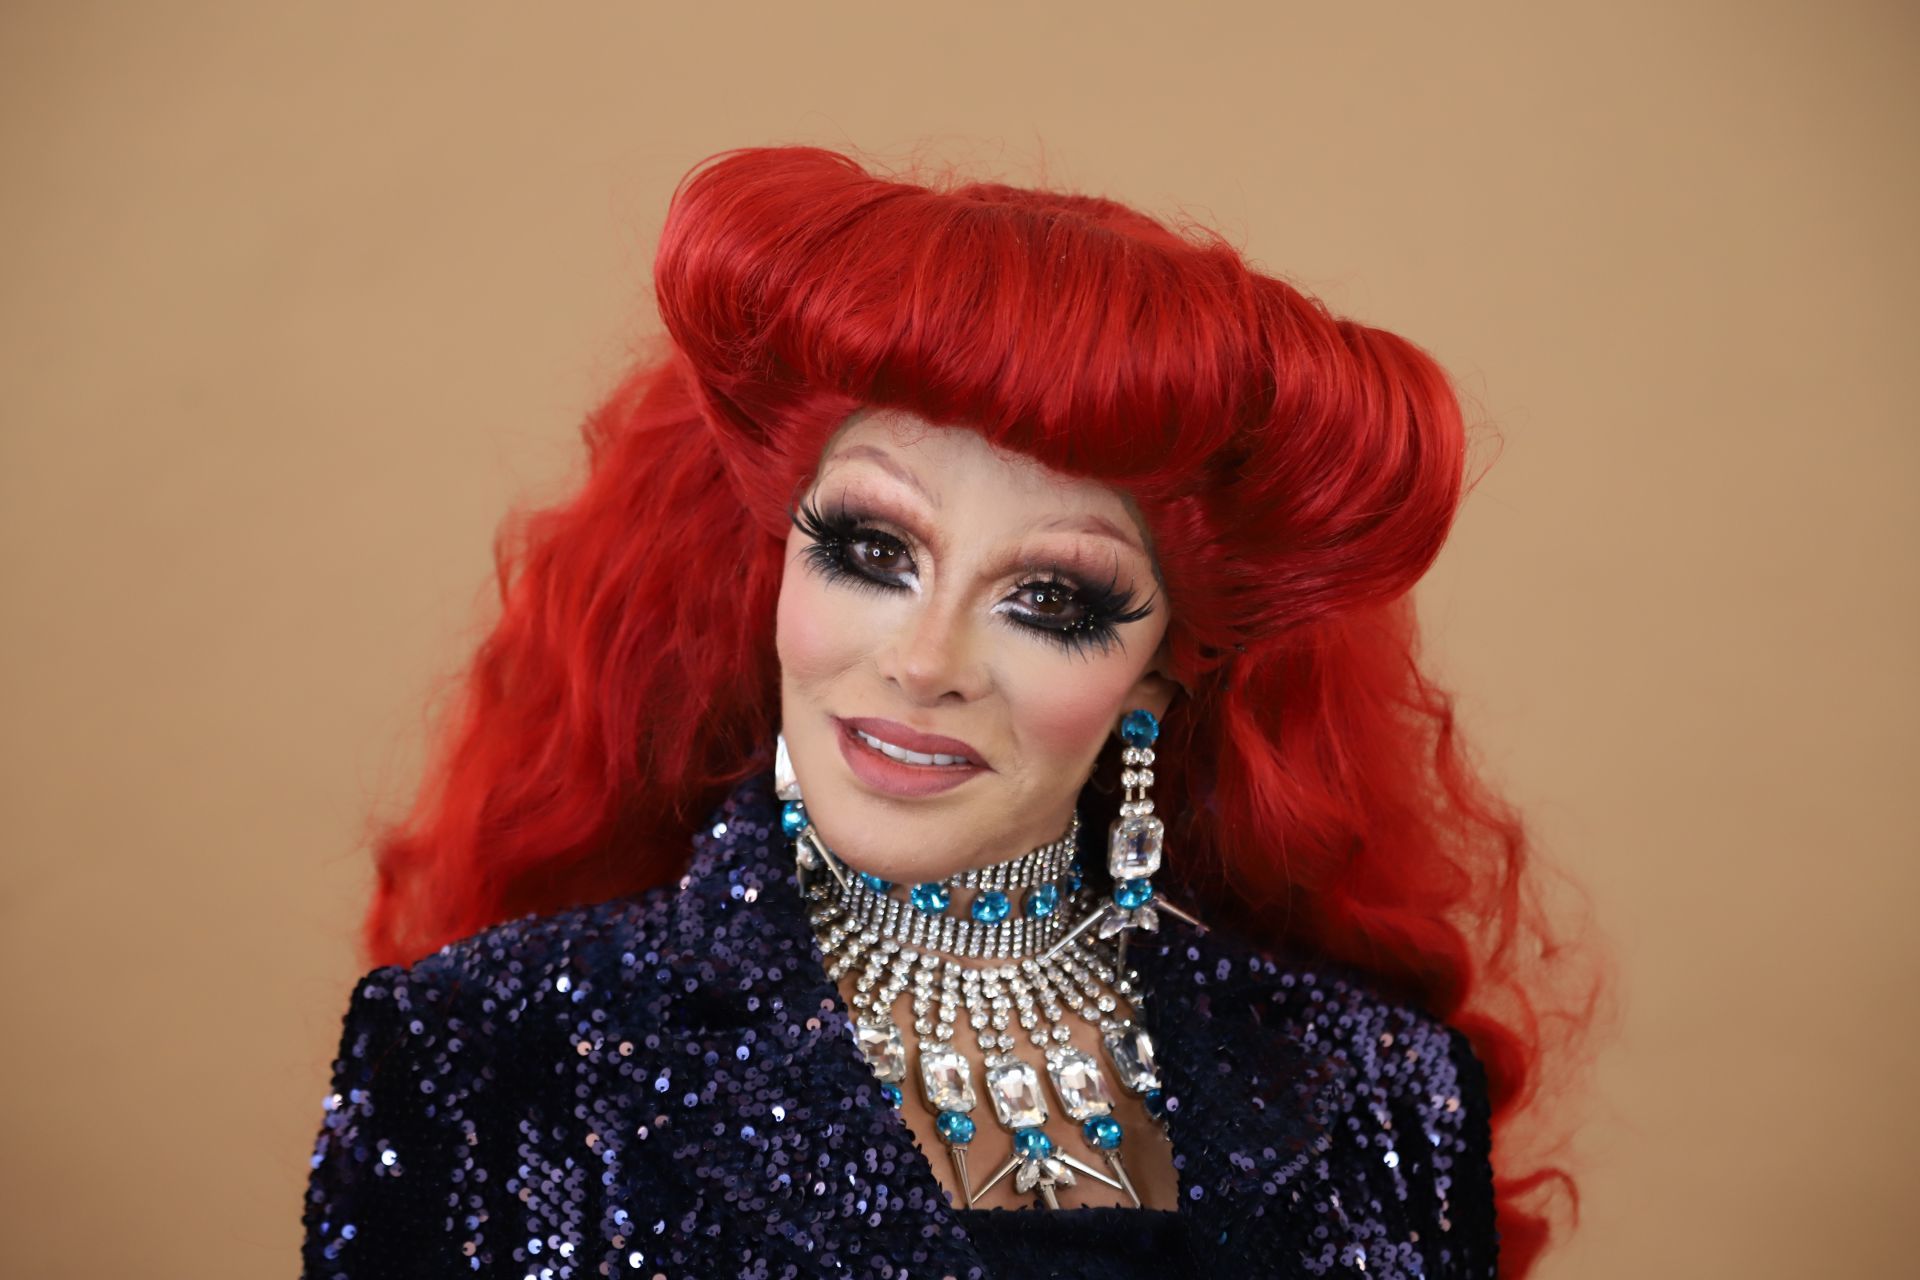 Lucía Méndez applauded the effort and dedication that the artists put into their work to transform into drag and make their presentations in character (Photo: CUARTOSCURO)